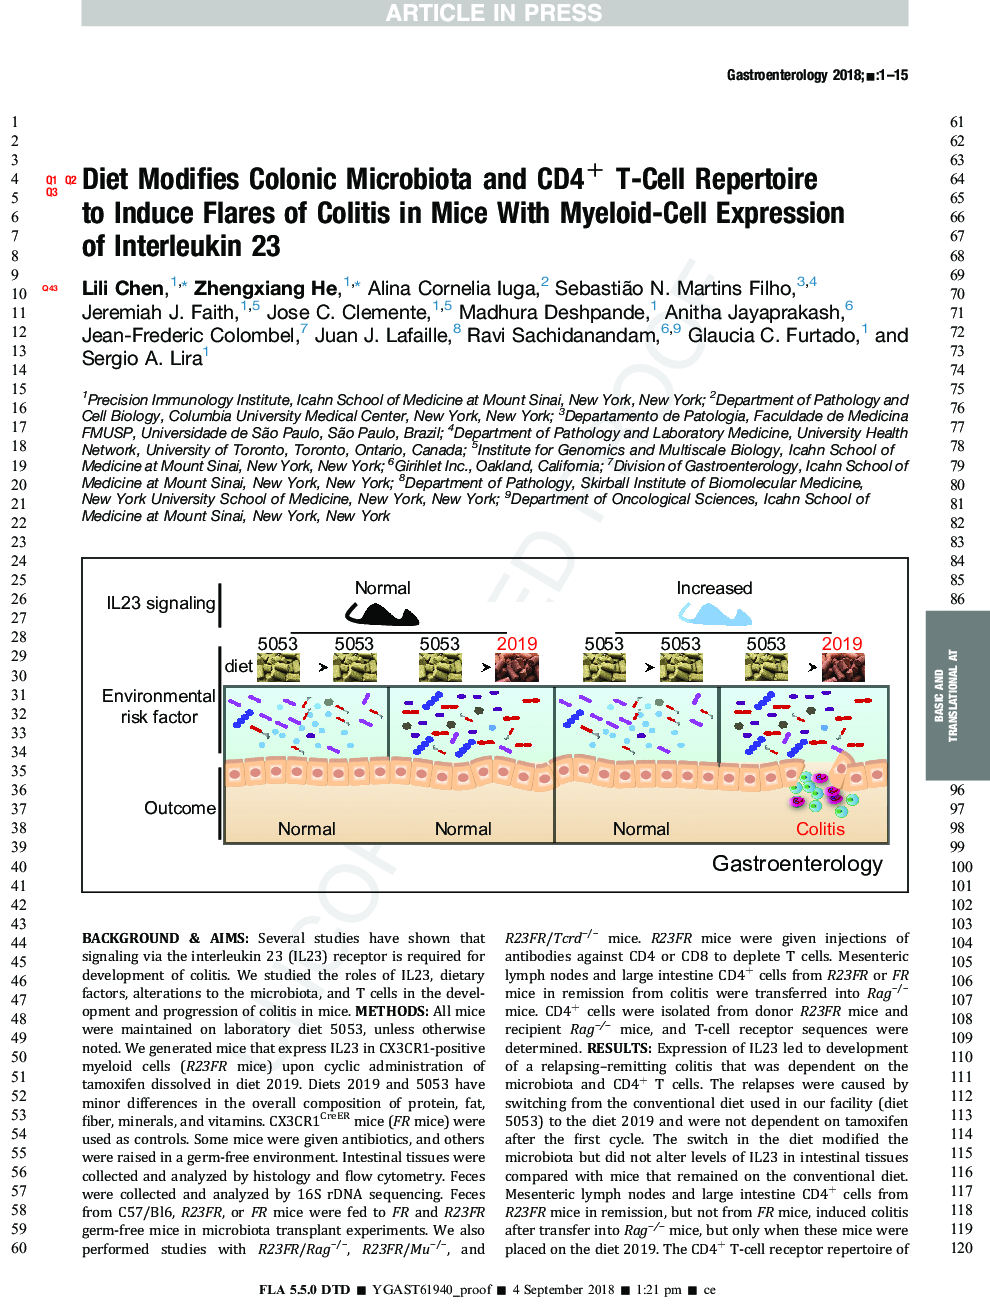 Diet Modifies Colonic Microbiota and CD4+ T-Cell Repertoire to Induce Flares of Colitis in Mice With Myeloid-Cell Expression of Interleukin 23